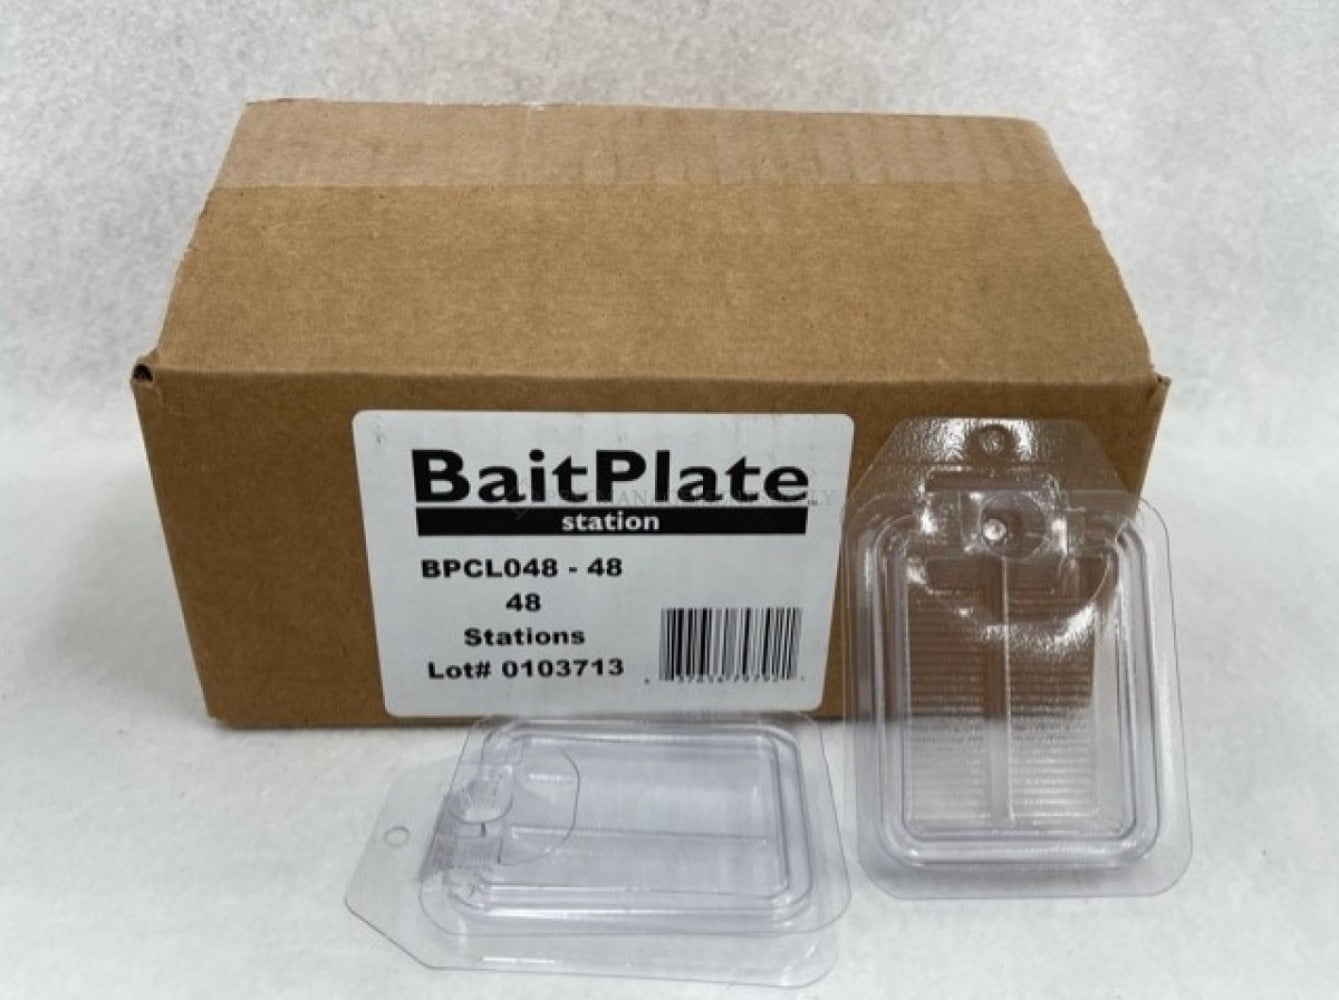 Rockwell BPCL048 Bait Plate Station, 1 Case of 48 Stations